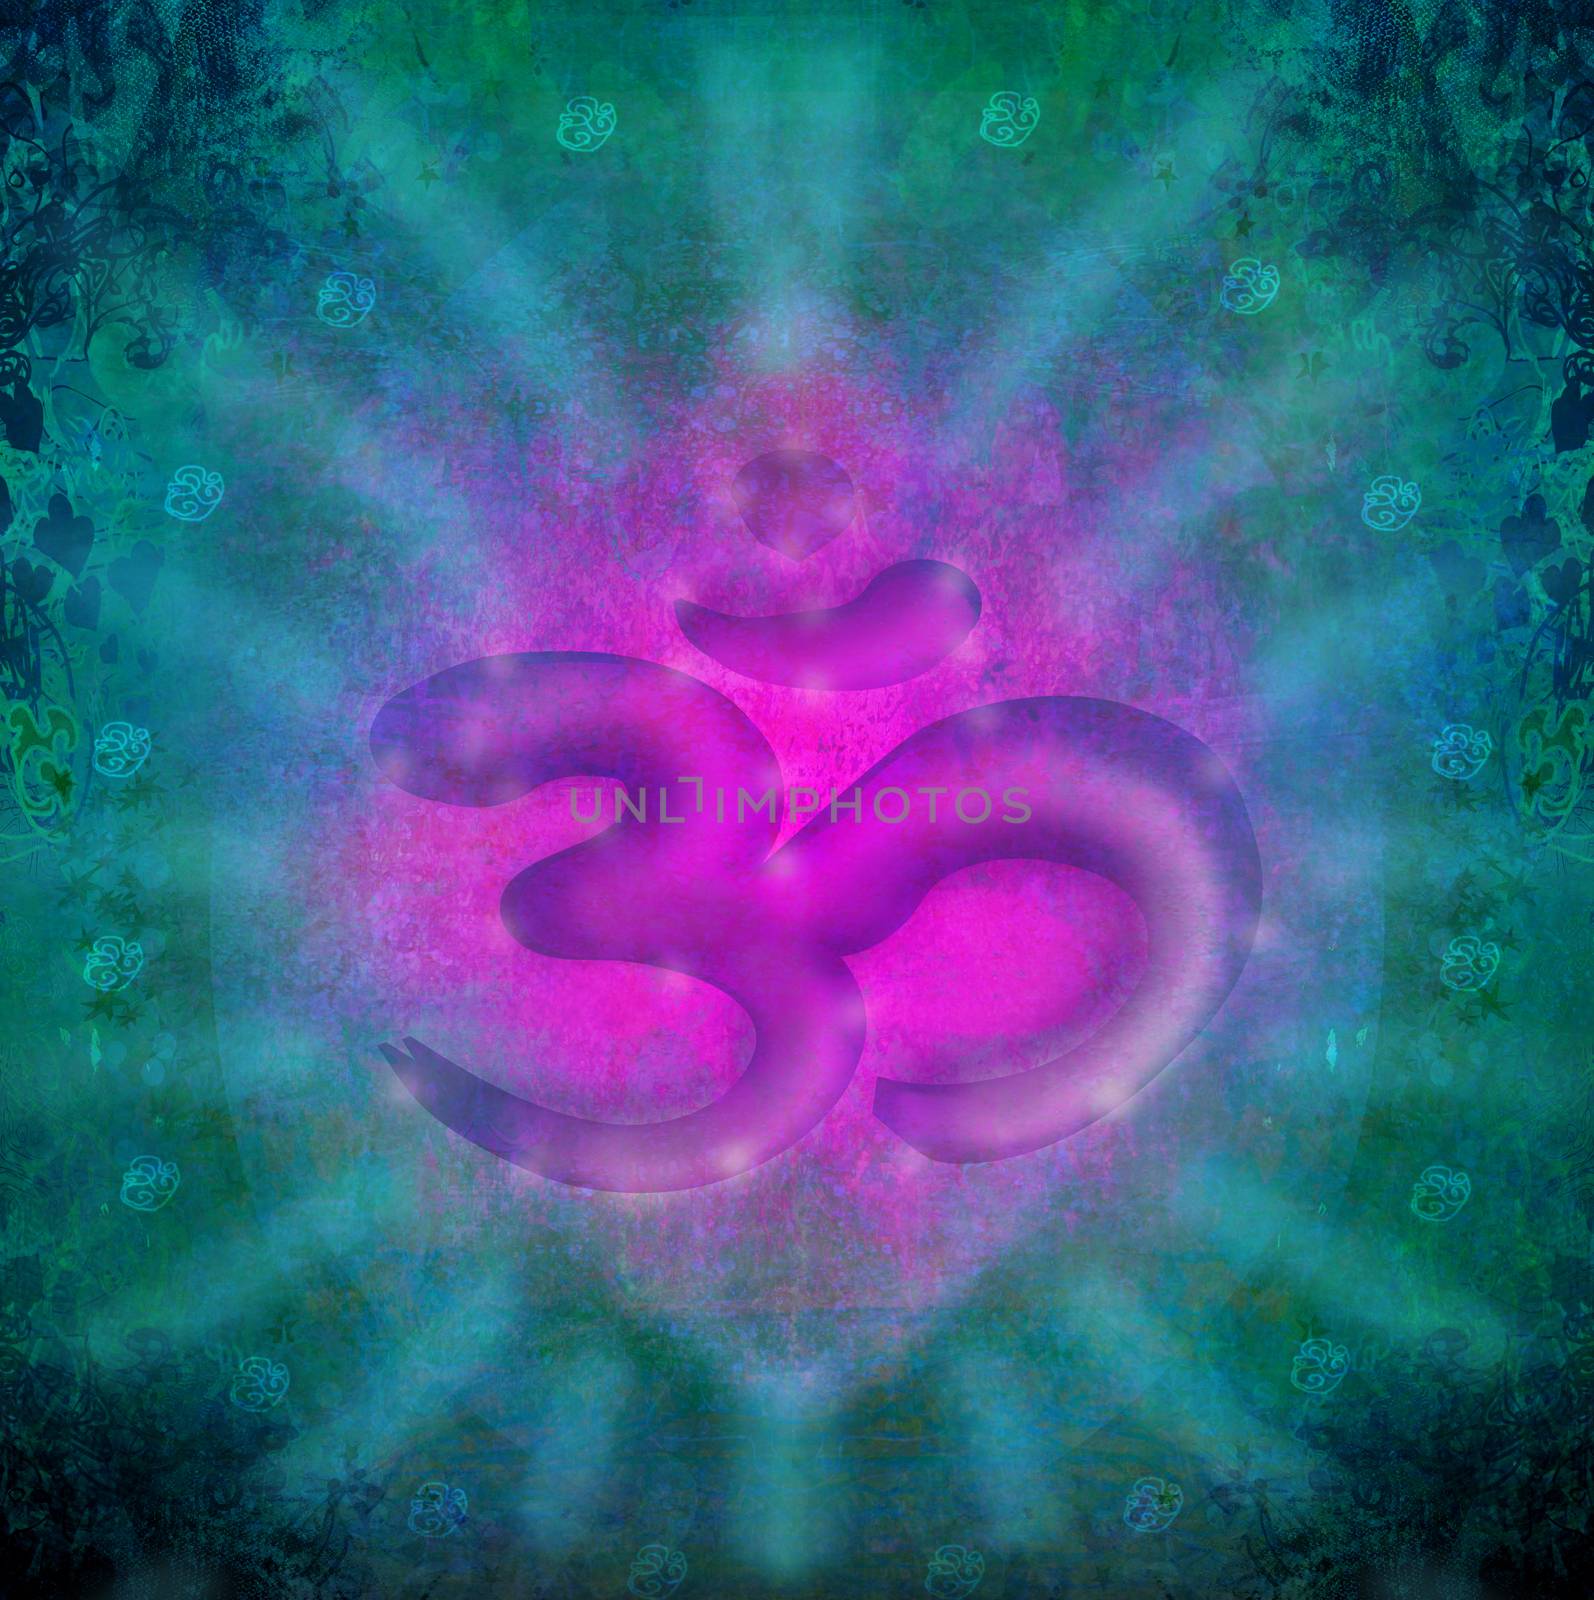 om aum symbol on a grunge texture by JackyBrown